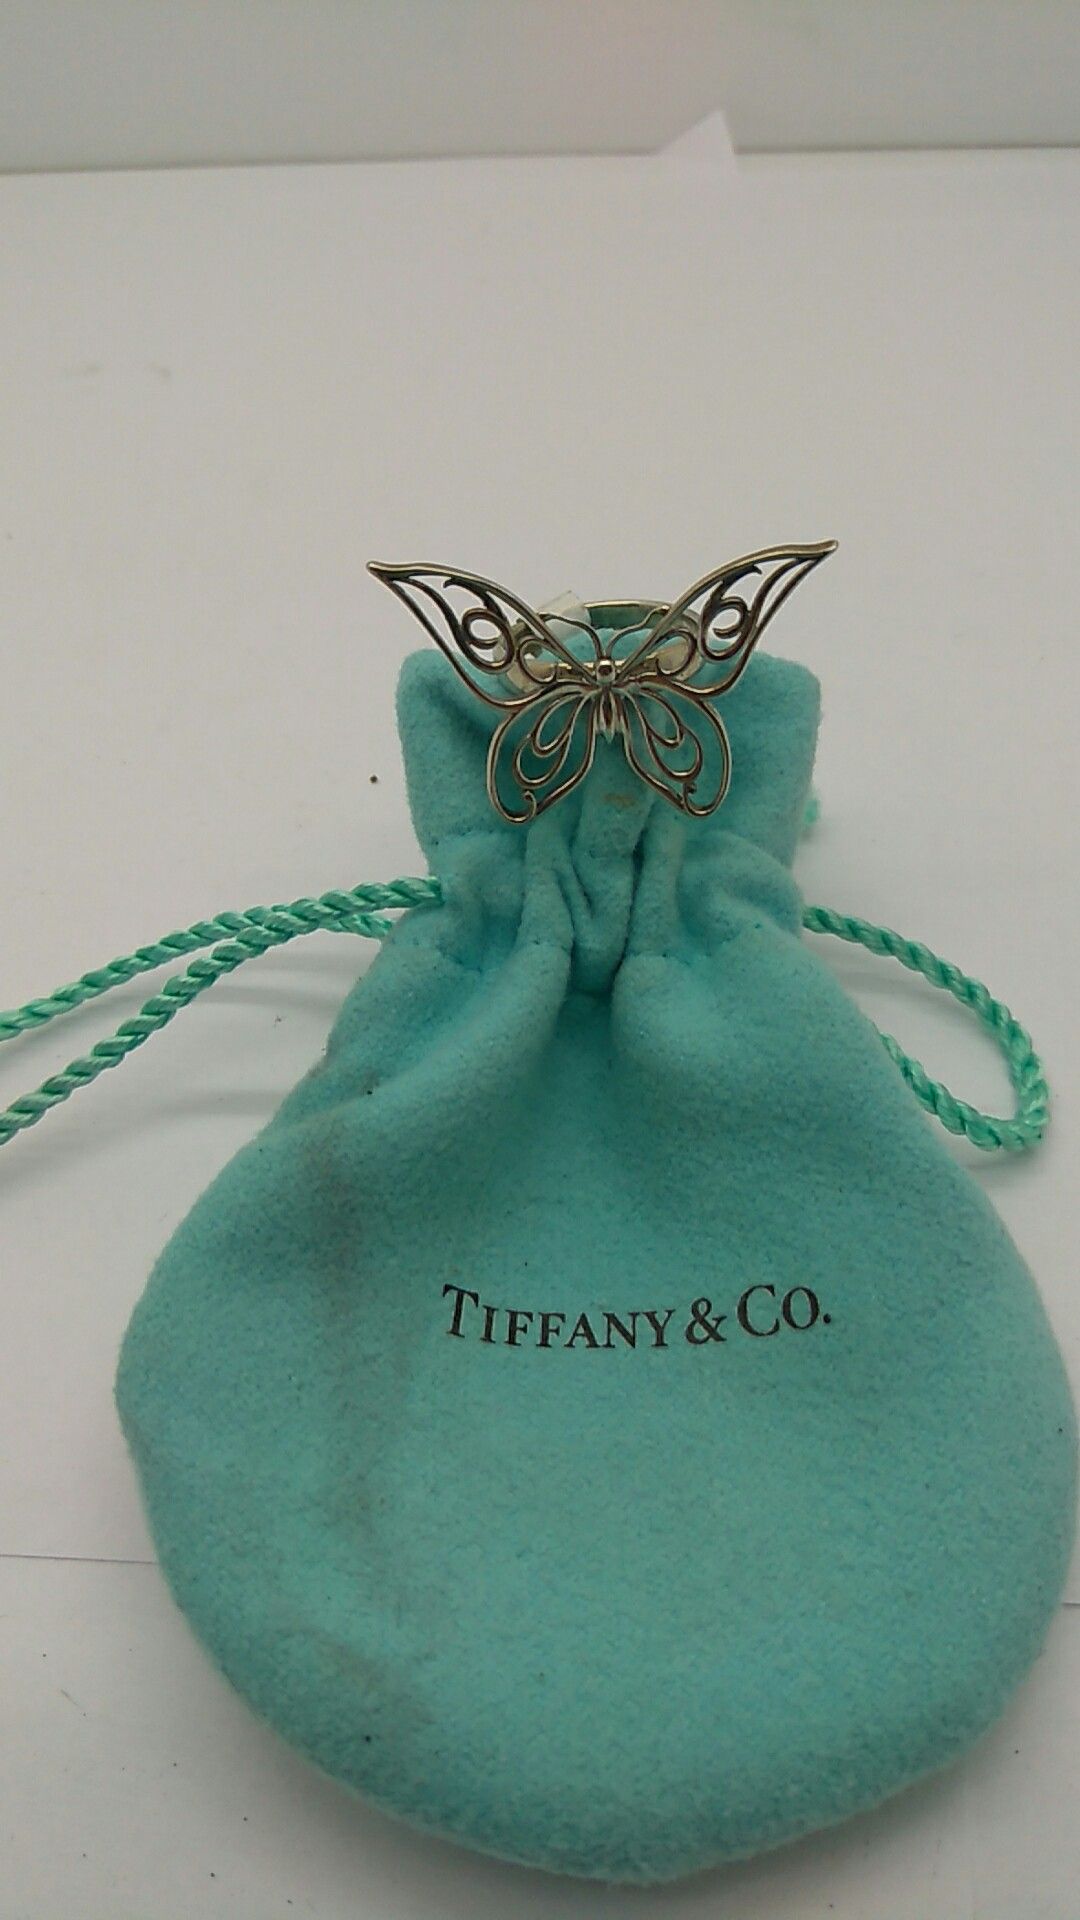 Tiffany & CO. Butterfly ring size 4